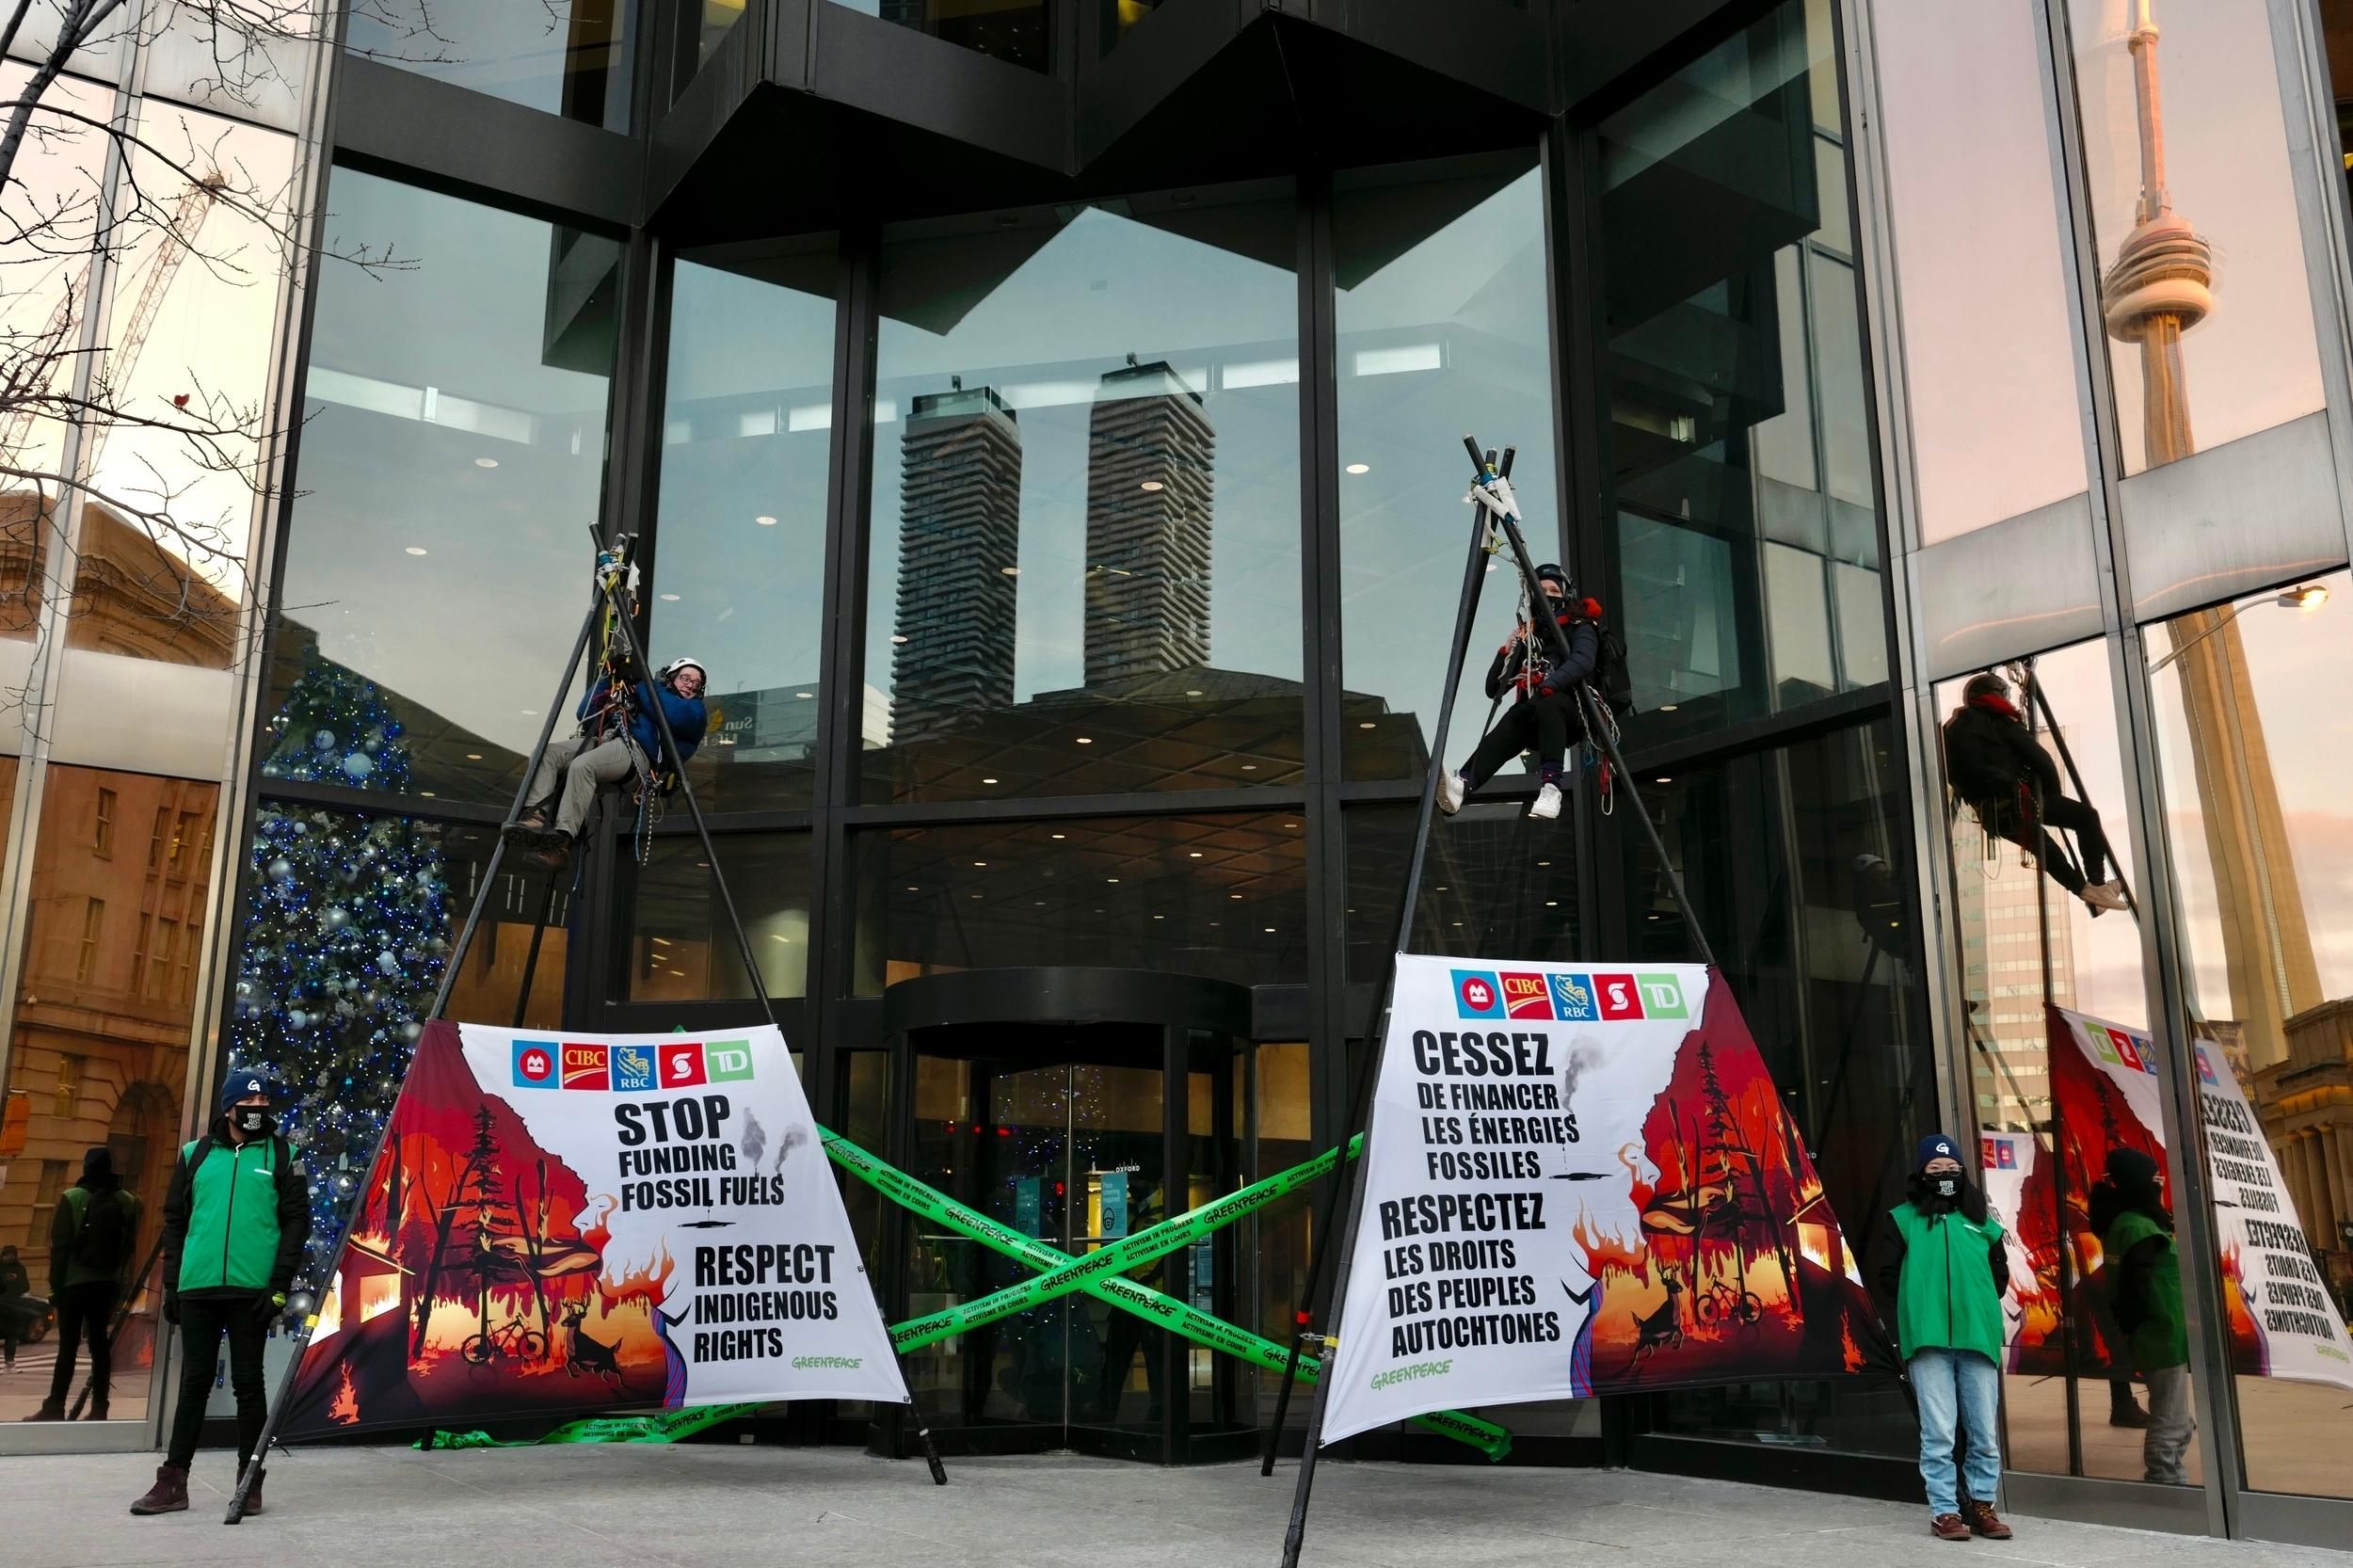 Greenpeace Canada campaigners disrupt business as usual in Toronto's financial district on December 7, 2021